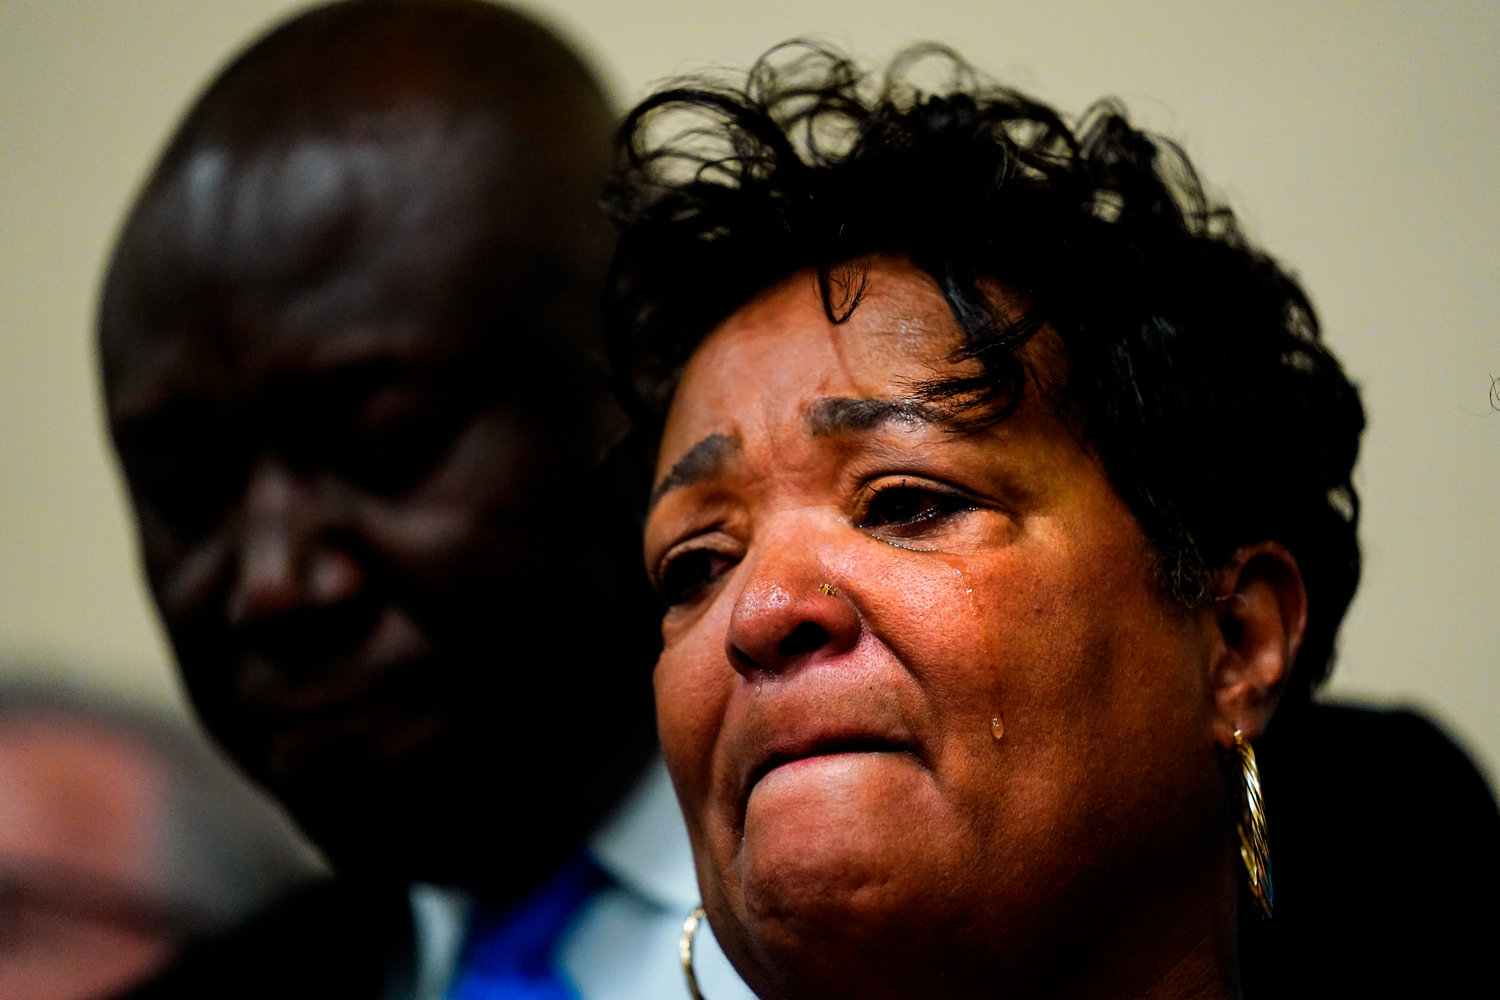 FILE - Angela Crawley, the daughter of Ruth Whitfield, a victim of shooting at a supermarket, speaks with members of the media during a news conference in Buffalo, N.Y. on May 16, 2022. The NAACP, the nation's oldest civil rights organization said it will propose a sweeping plan meant to protect Black Americans from white supremacist violence, in response to a hate-fueled massacre that killed 10 Black people in Buffalo, New York last weekend. (AP Photo/Matt Rourke, File)